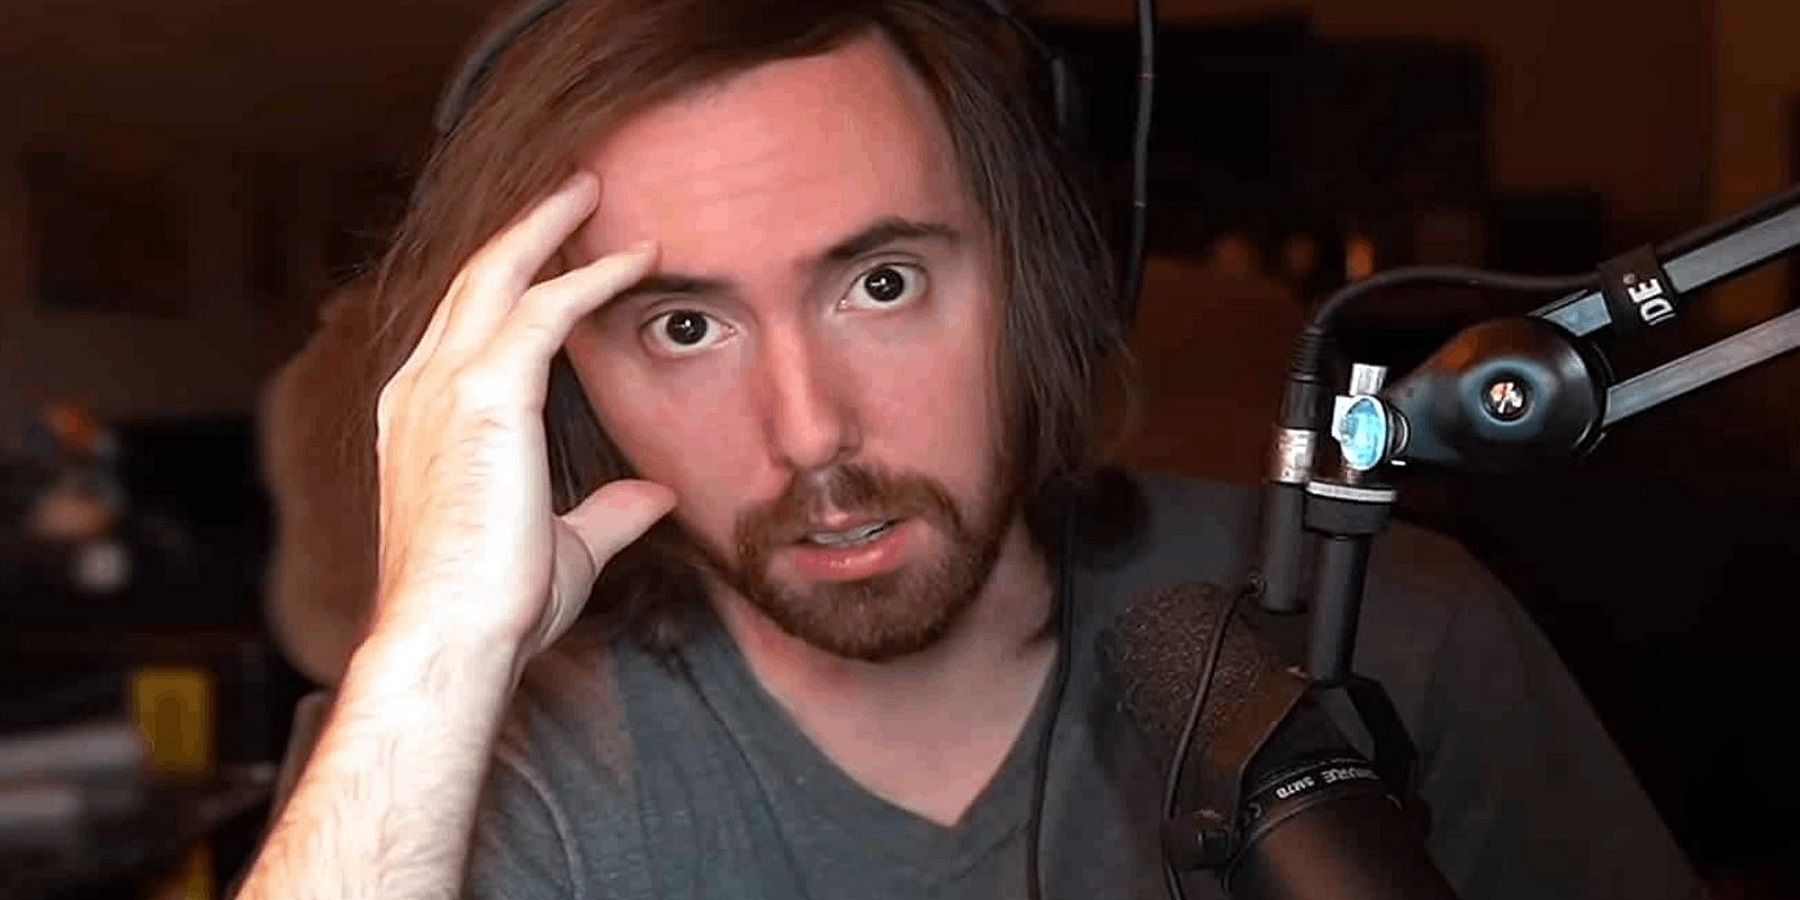 Asmongold Has Harsh Words For CrazySlick, Mizkif, And Twitch Amid Controversies